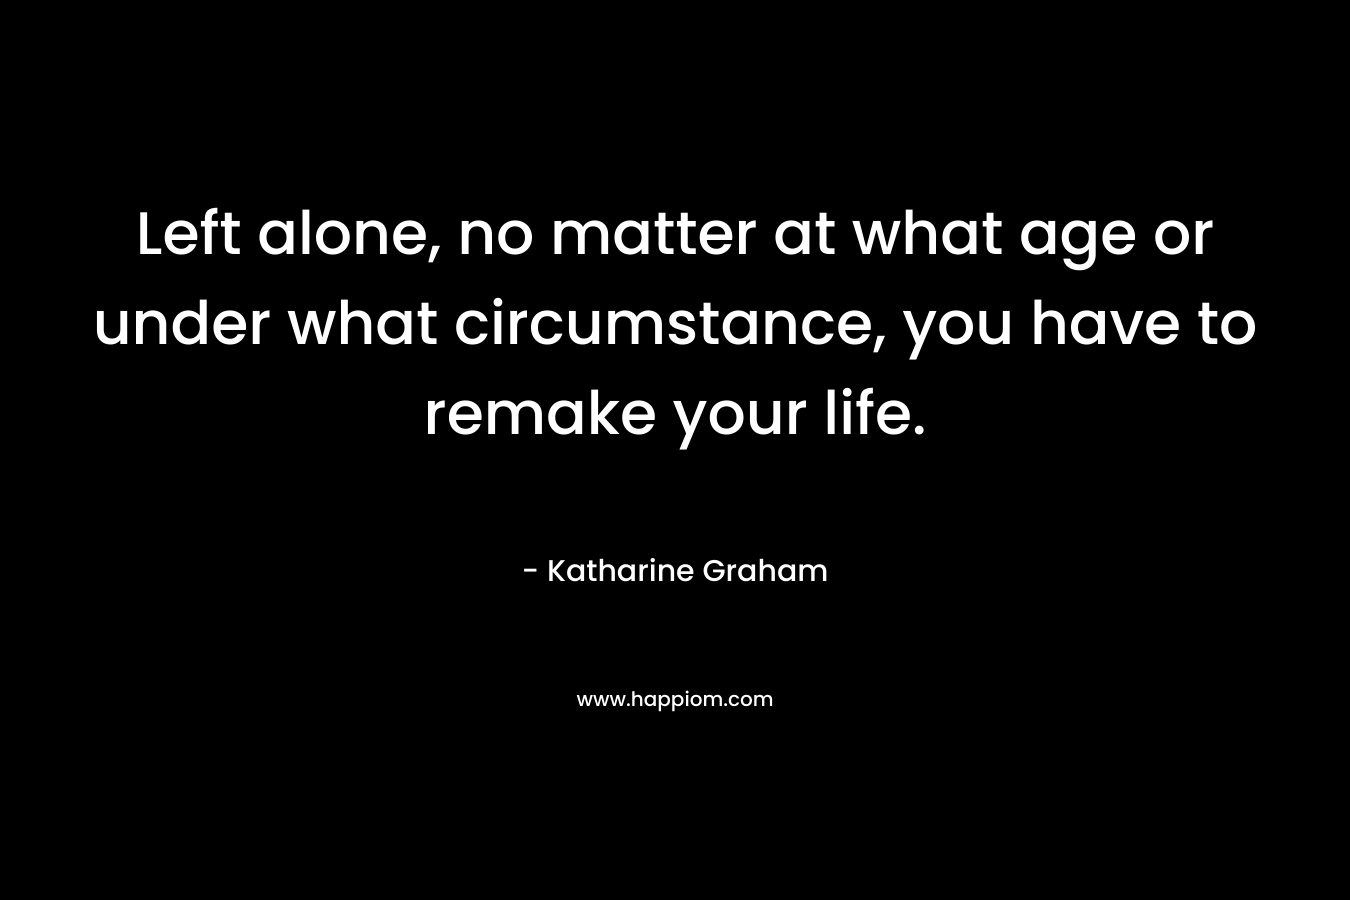 Left alone, no matter at what age or under what circumstance, you have to remake your life. – Katharine Graham